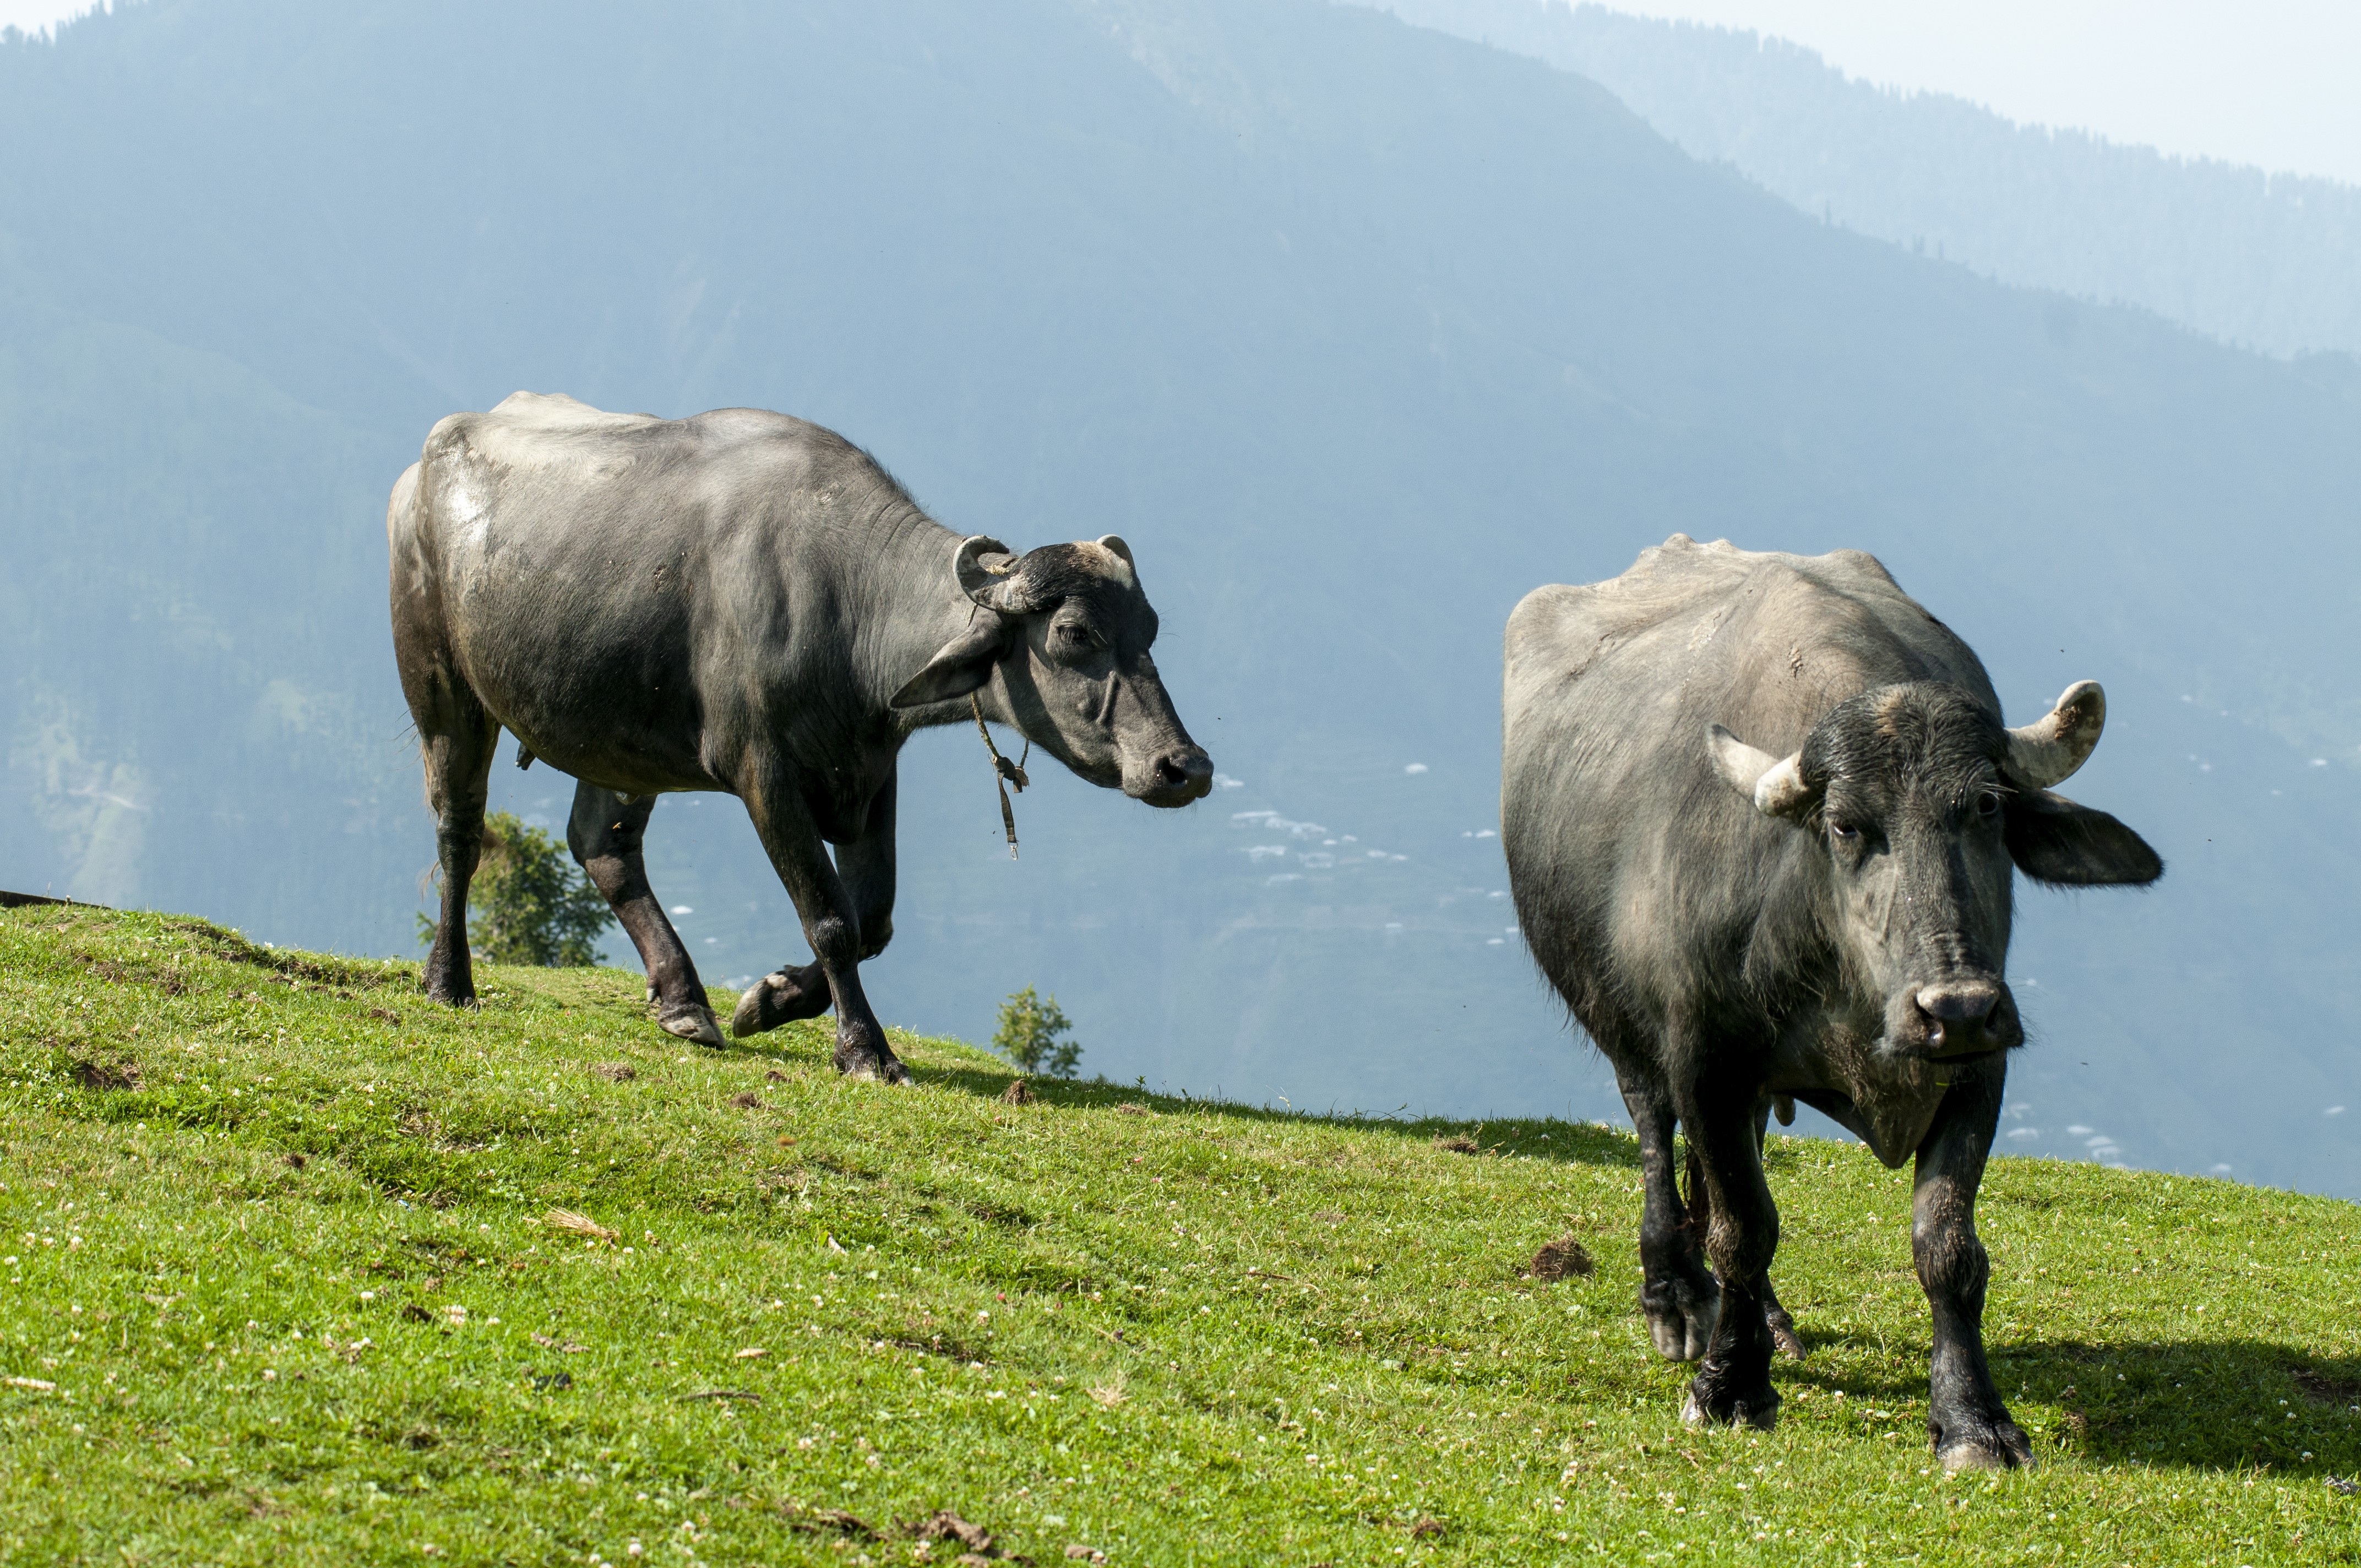 Buffaloes grazing in the field